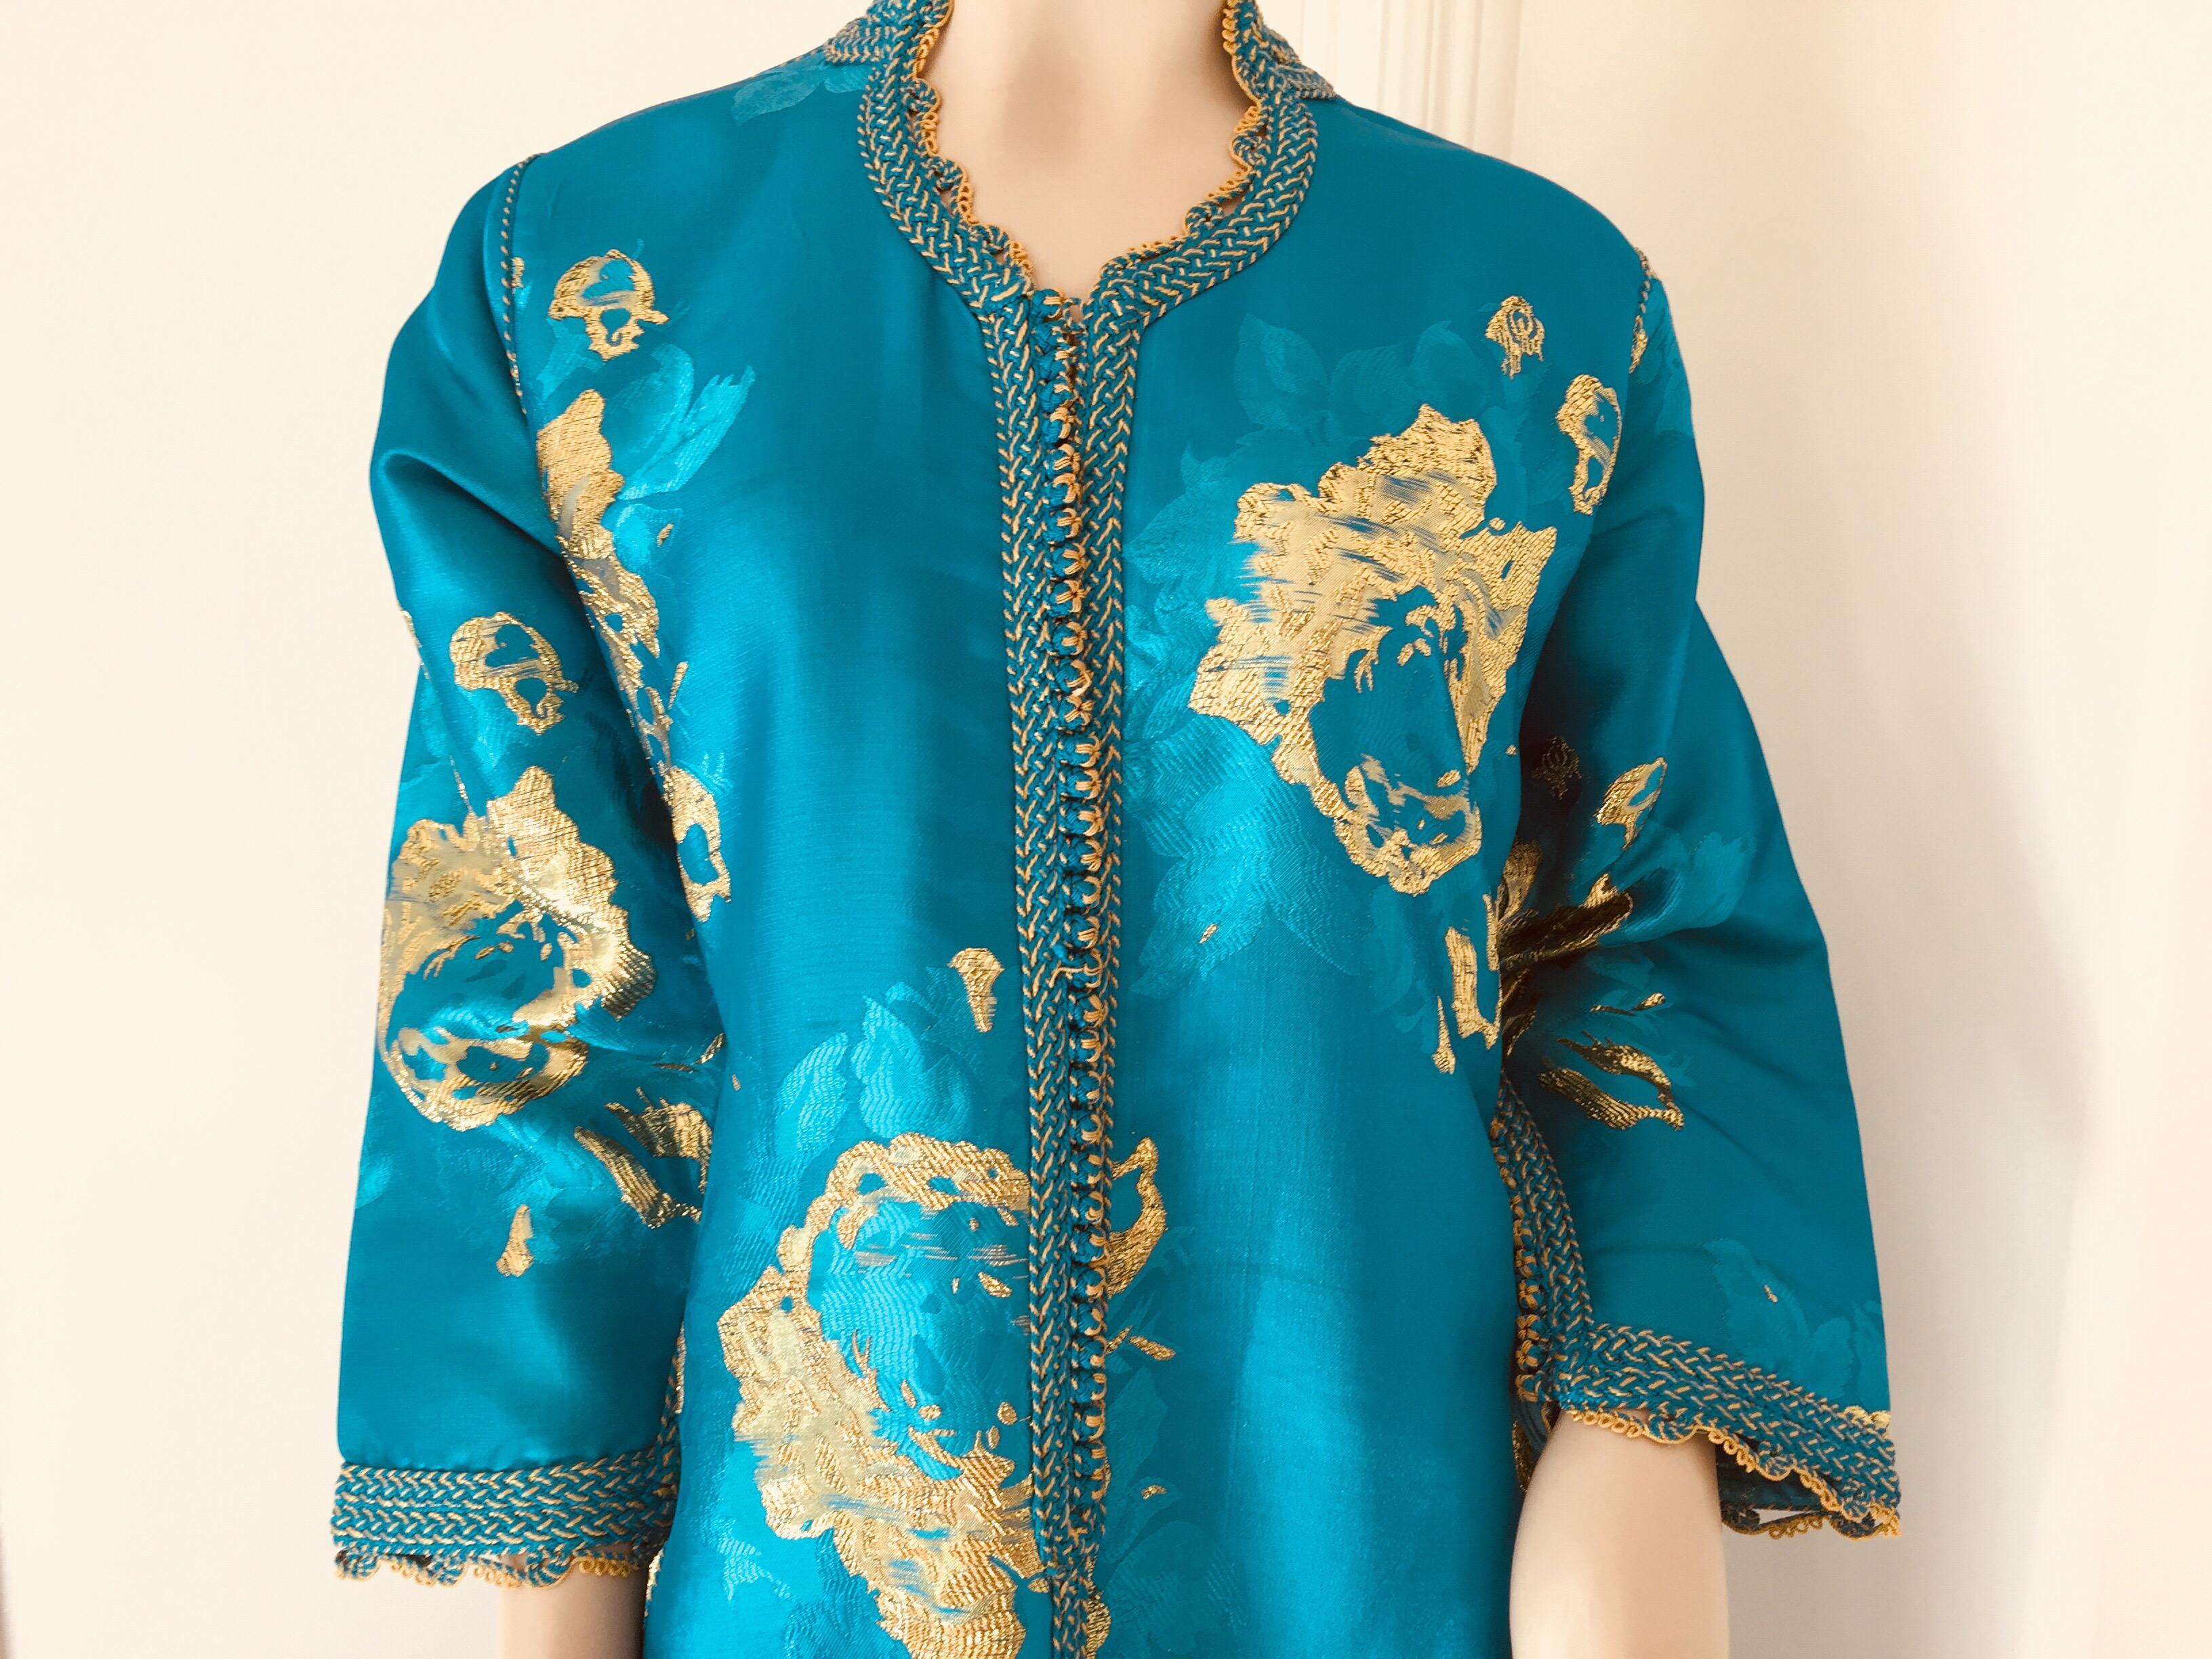 Moroccan Kaftan in Turquoise and Gold Floral Brocade Metallic Lame 1